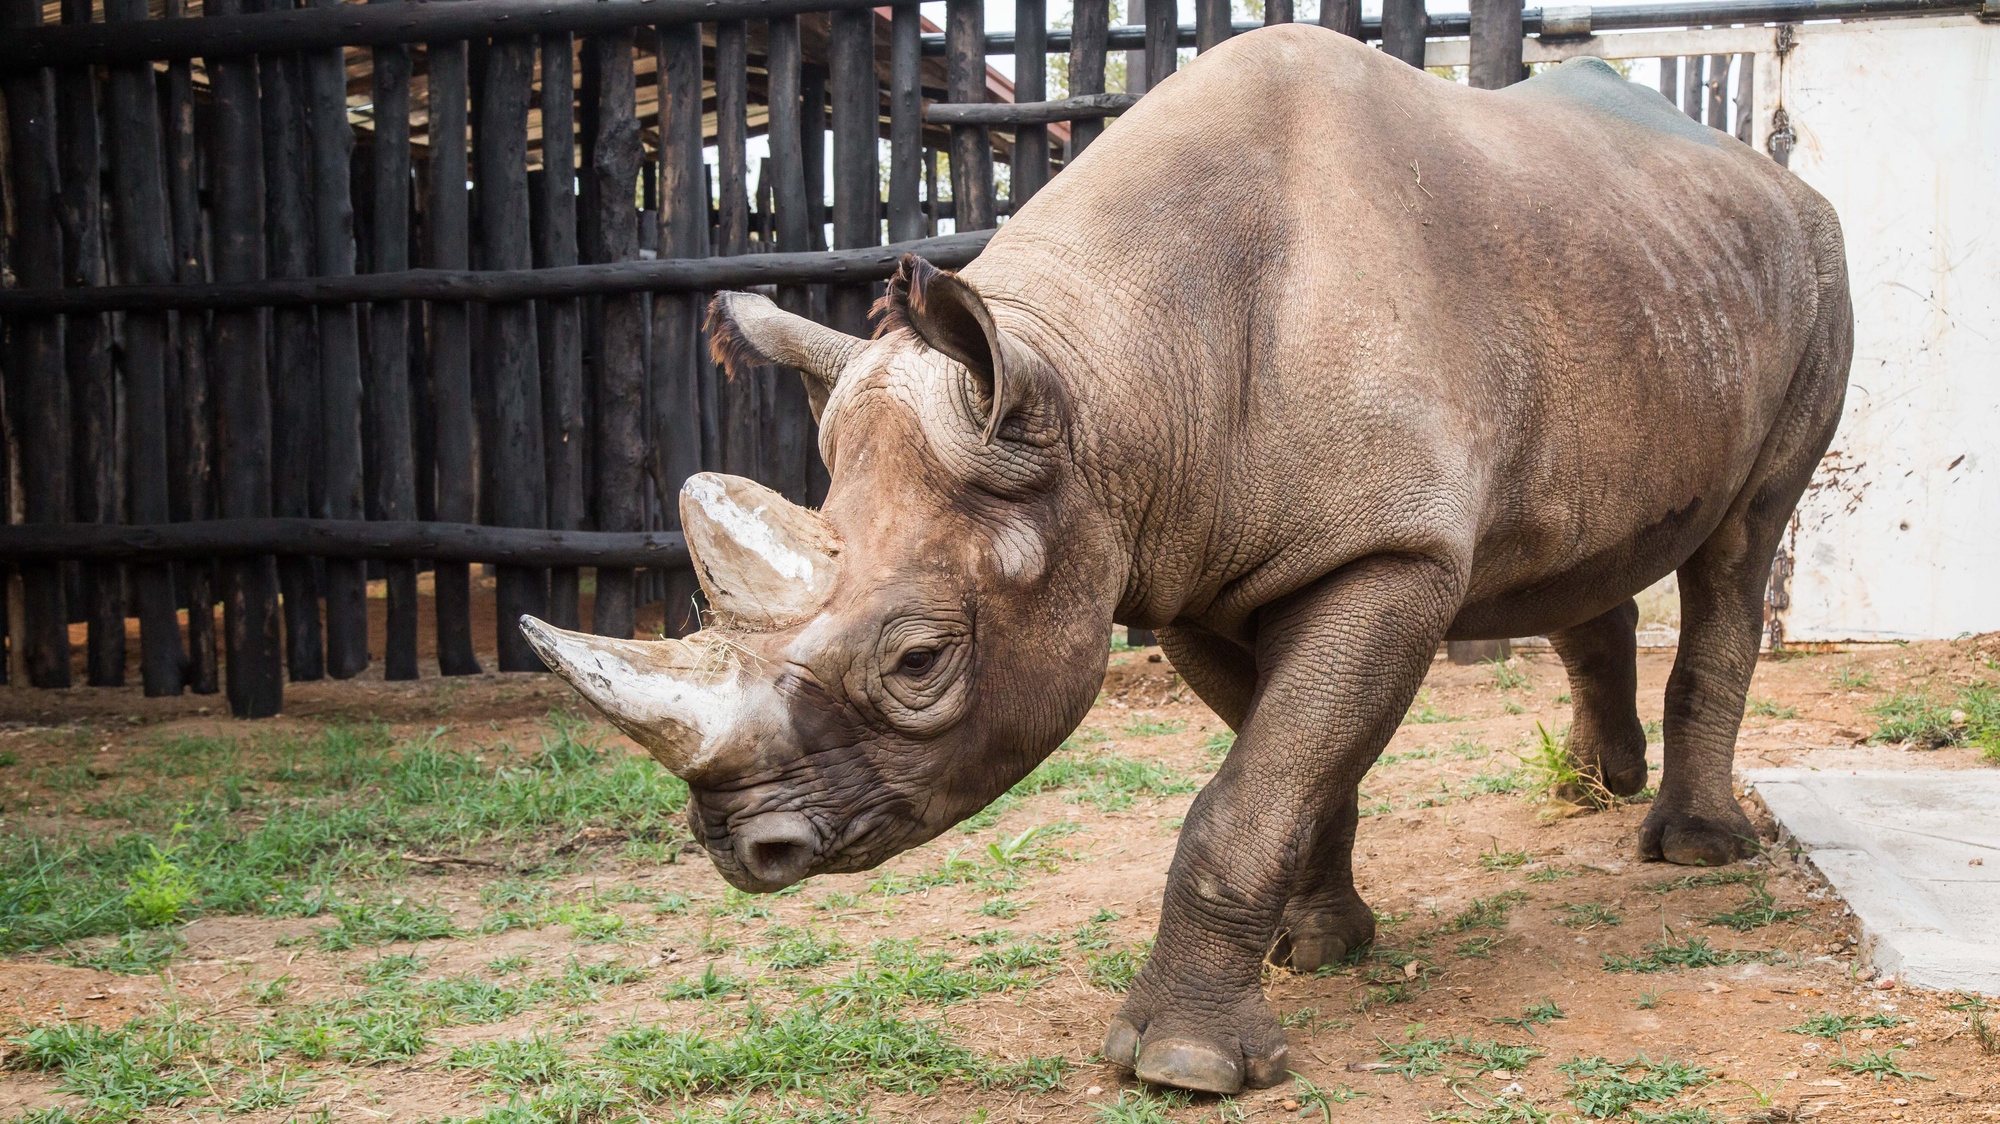 epa07670845 A handout photo made available by the Safari Park in Dvur Kralove nad Labem and African Parks shows one of five rhinos in its enclosure at Akagera National Park, Rwanda, 24 June 2019. Three black rhinos (Diceros bicornis michaeli) from Safari Park Dvur Kralove and two black rhinos from other European gardens are set out for the Akagera National Park in Rwanda. This is the largest rhino transport ever from Europe to Africa, where they should start a new population. All animals are prepared for the trip in Dvur Kralove. The trip included three rhinos from Dvur, Jasiri, Jasmina and Manny, female Olmoti from the English zoo Flamingo Land and male Mandela from Denmark. These five will find a new home in Akagera National Park, Rwanda, where the last rhinos were seen in 2007. According to Safari Park, only about 700 black rhinos live in the wild.  EPA/SCOTT RAMSAY / AFRICAN PARKS / HANDOUT  HANDOUT EDITORIAL USE ONLY/NO SALES